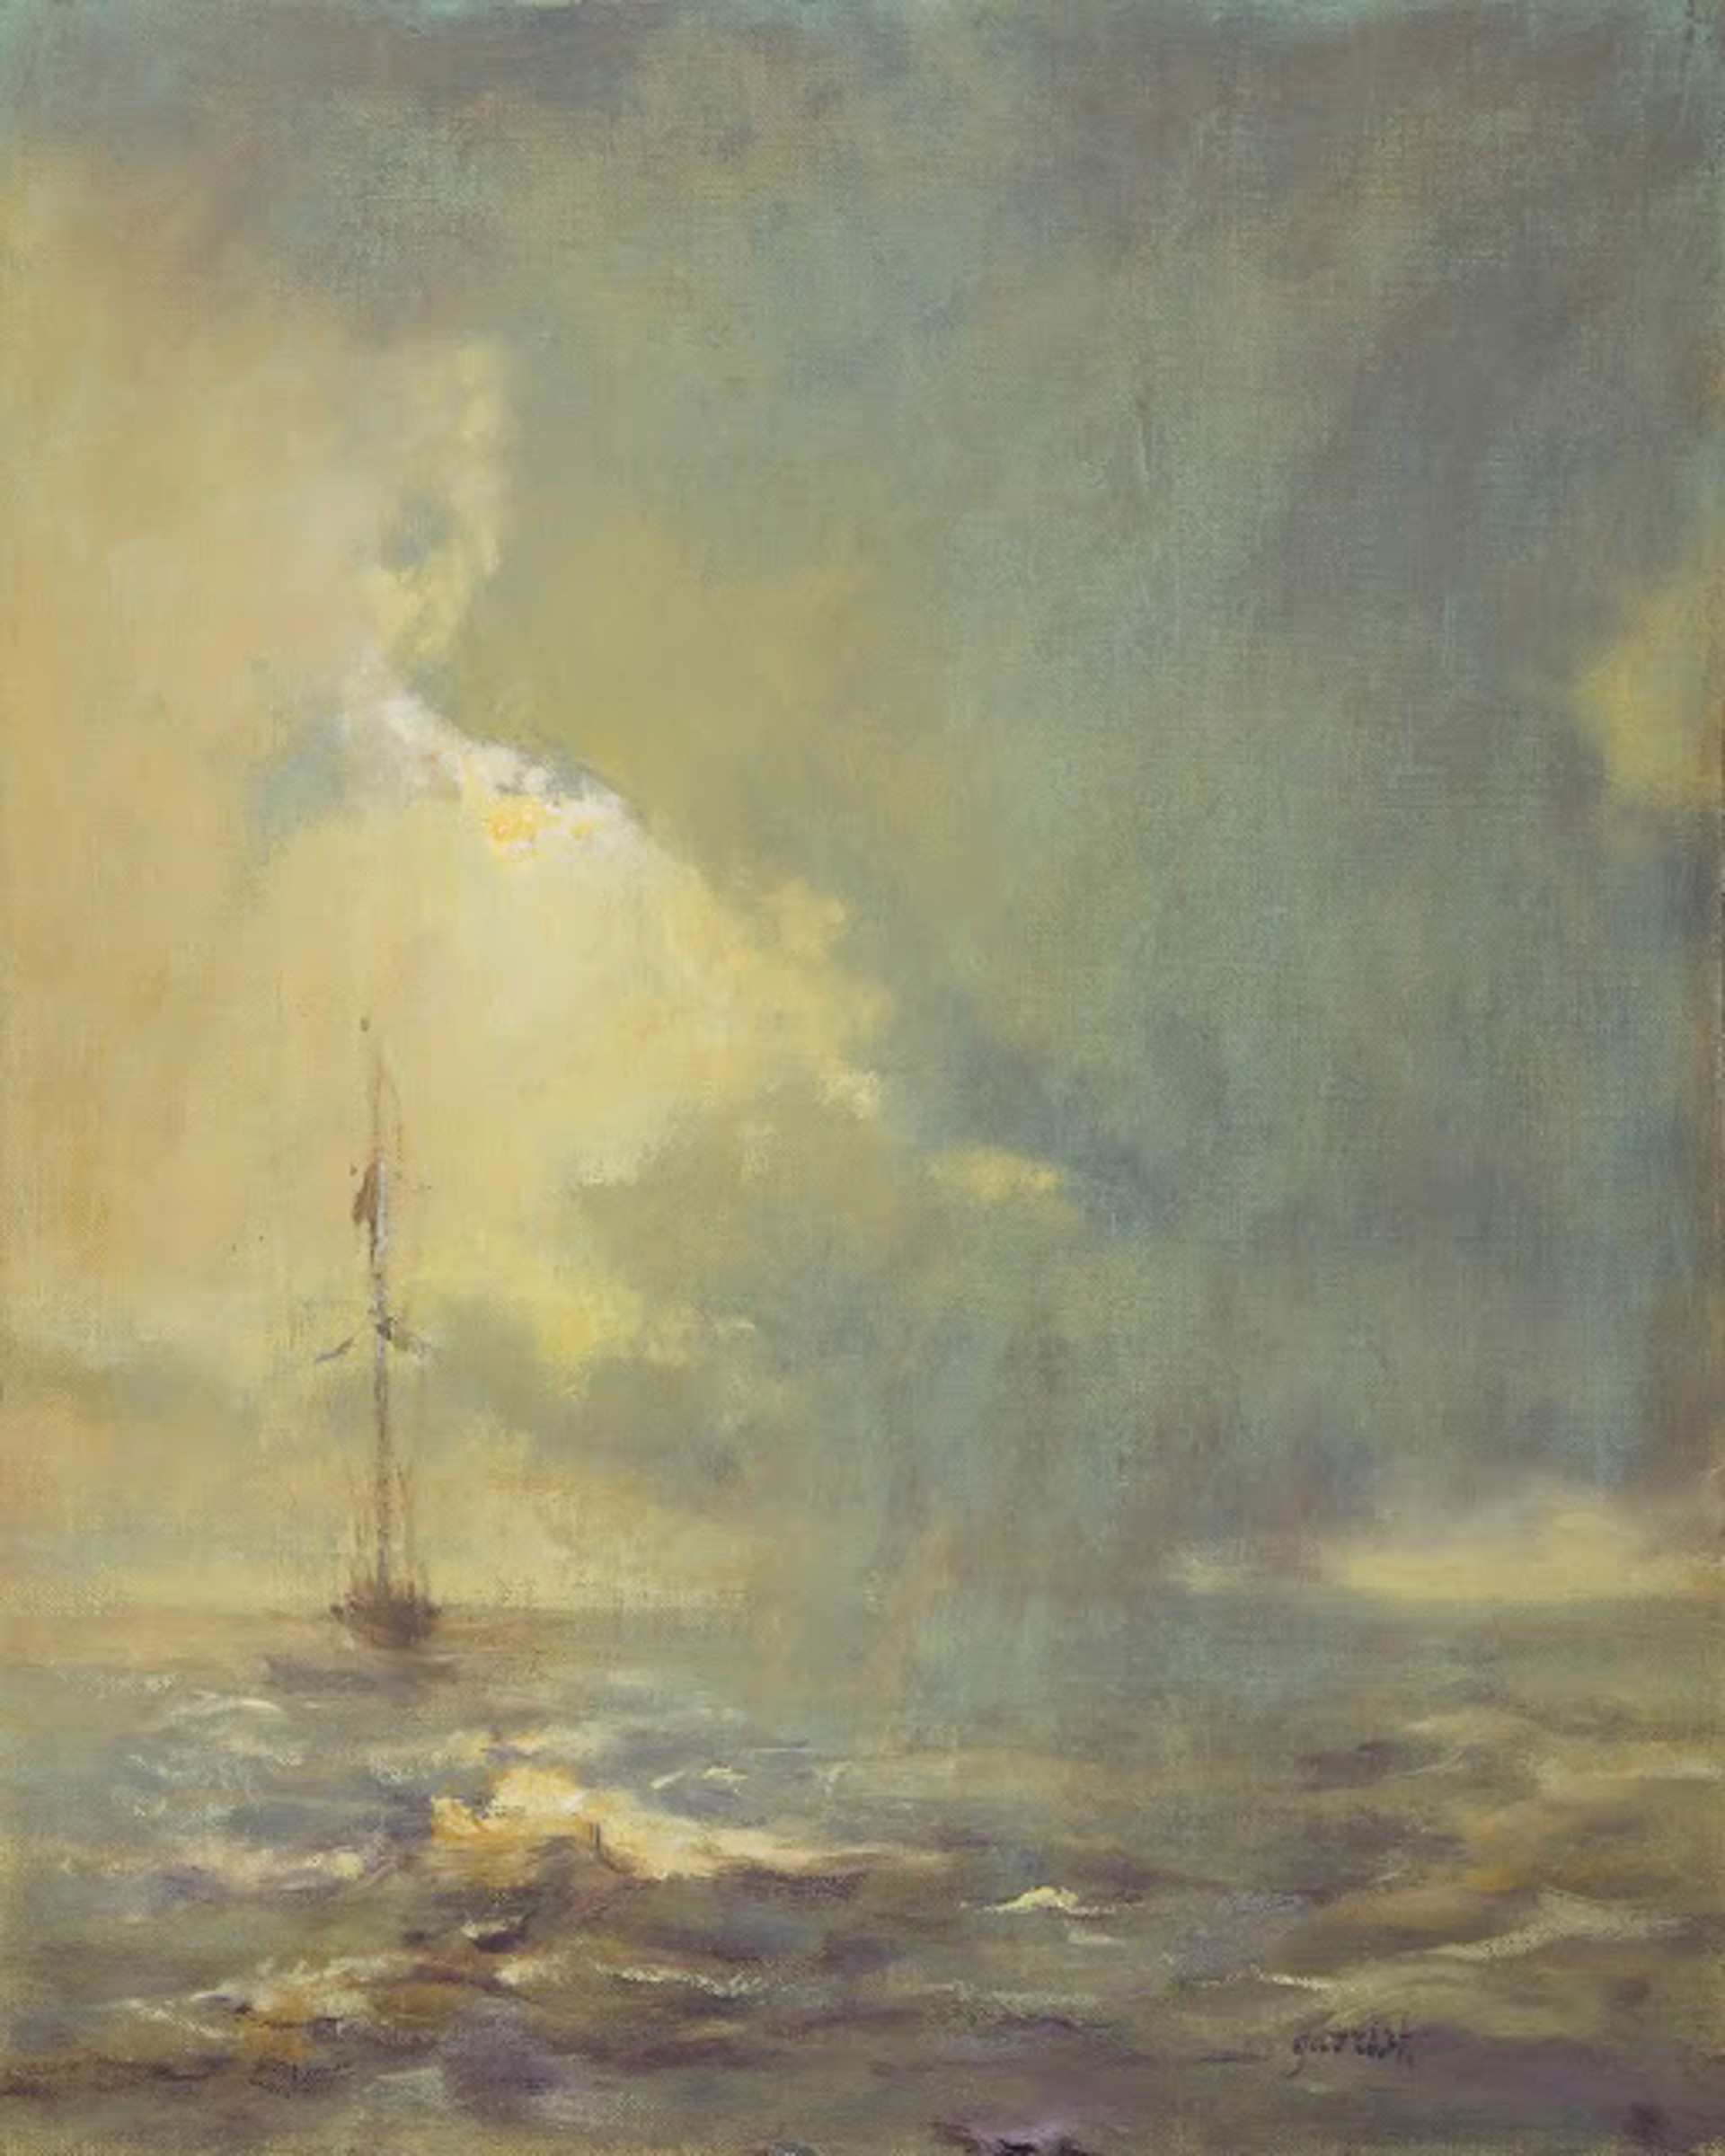 "Choppy Seas with Boat" original oil painting by Mary Garrish